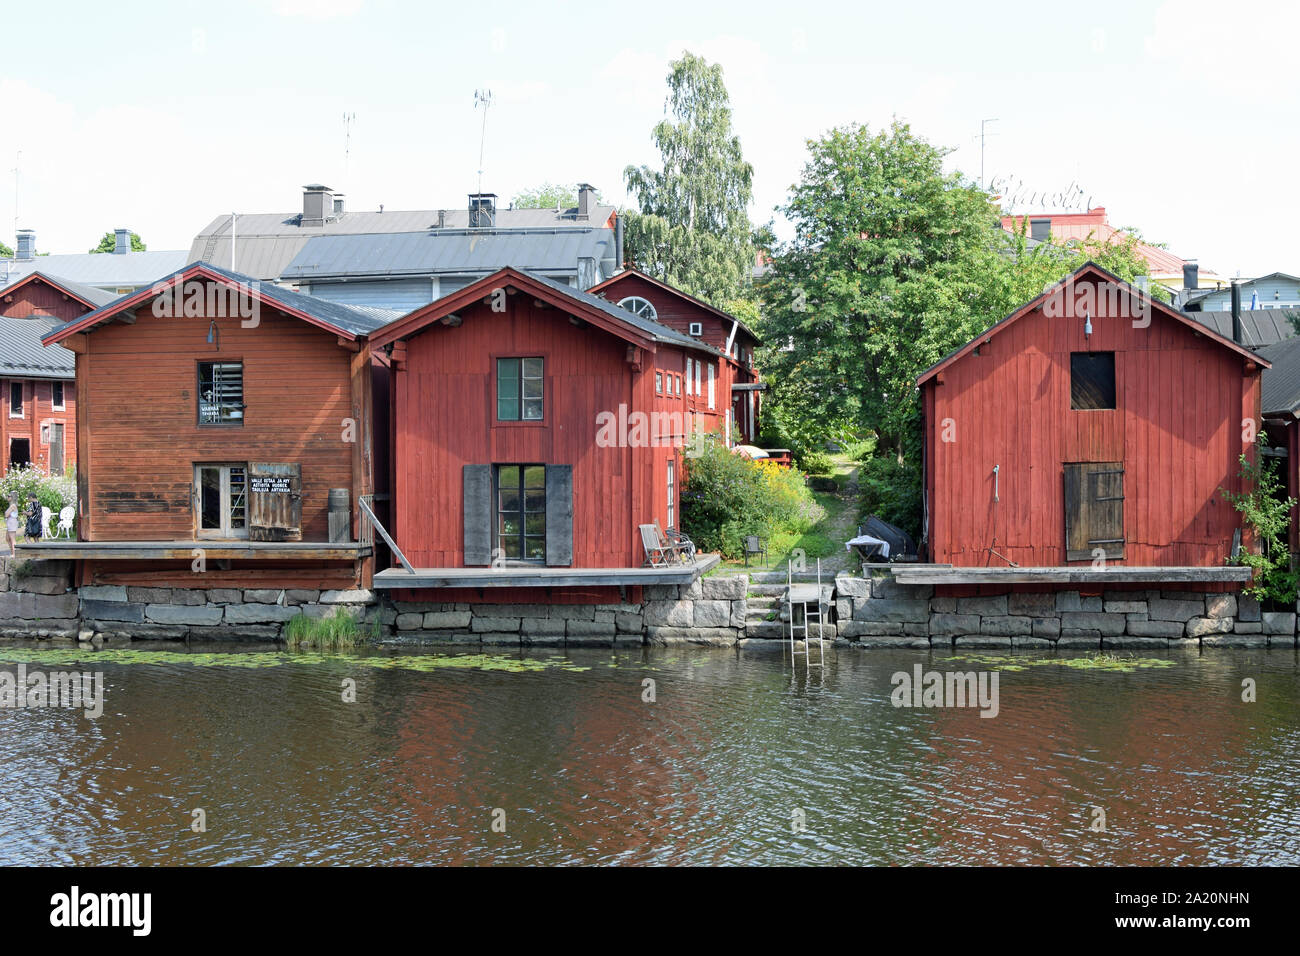 Porvoo, Finland - July 28, 2019: Old wooden red houses on the riverside. Stock Photo